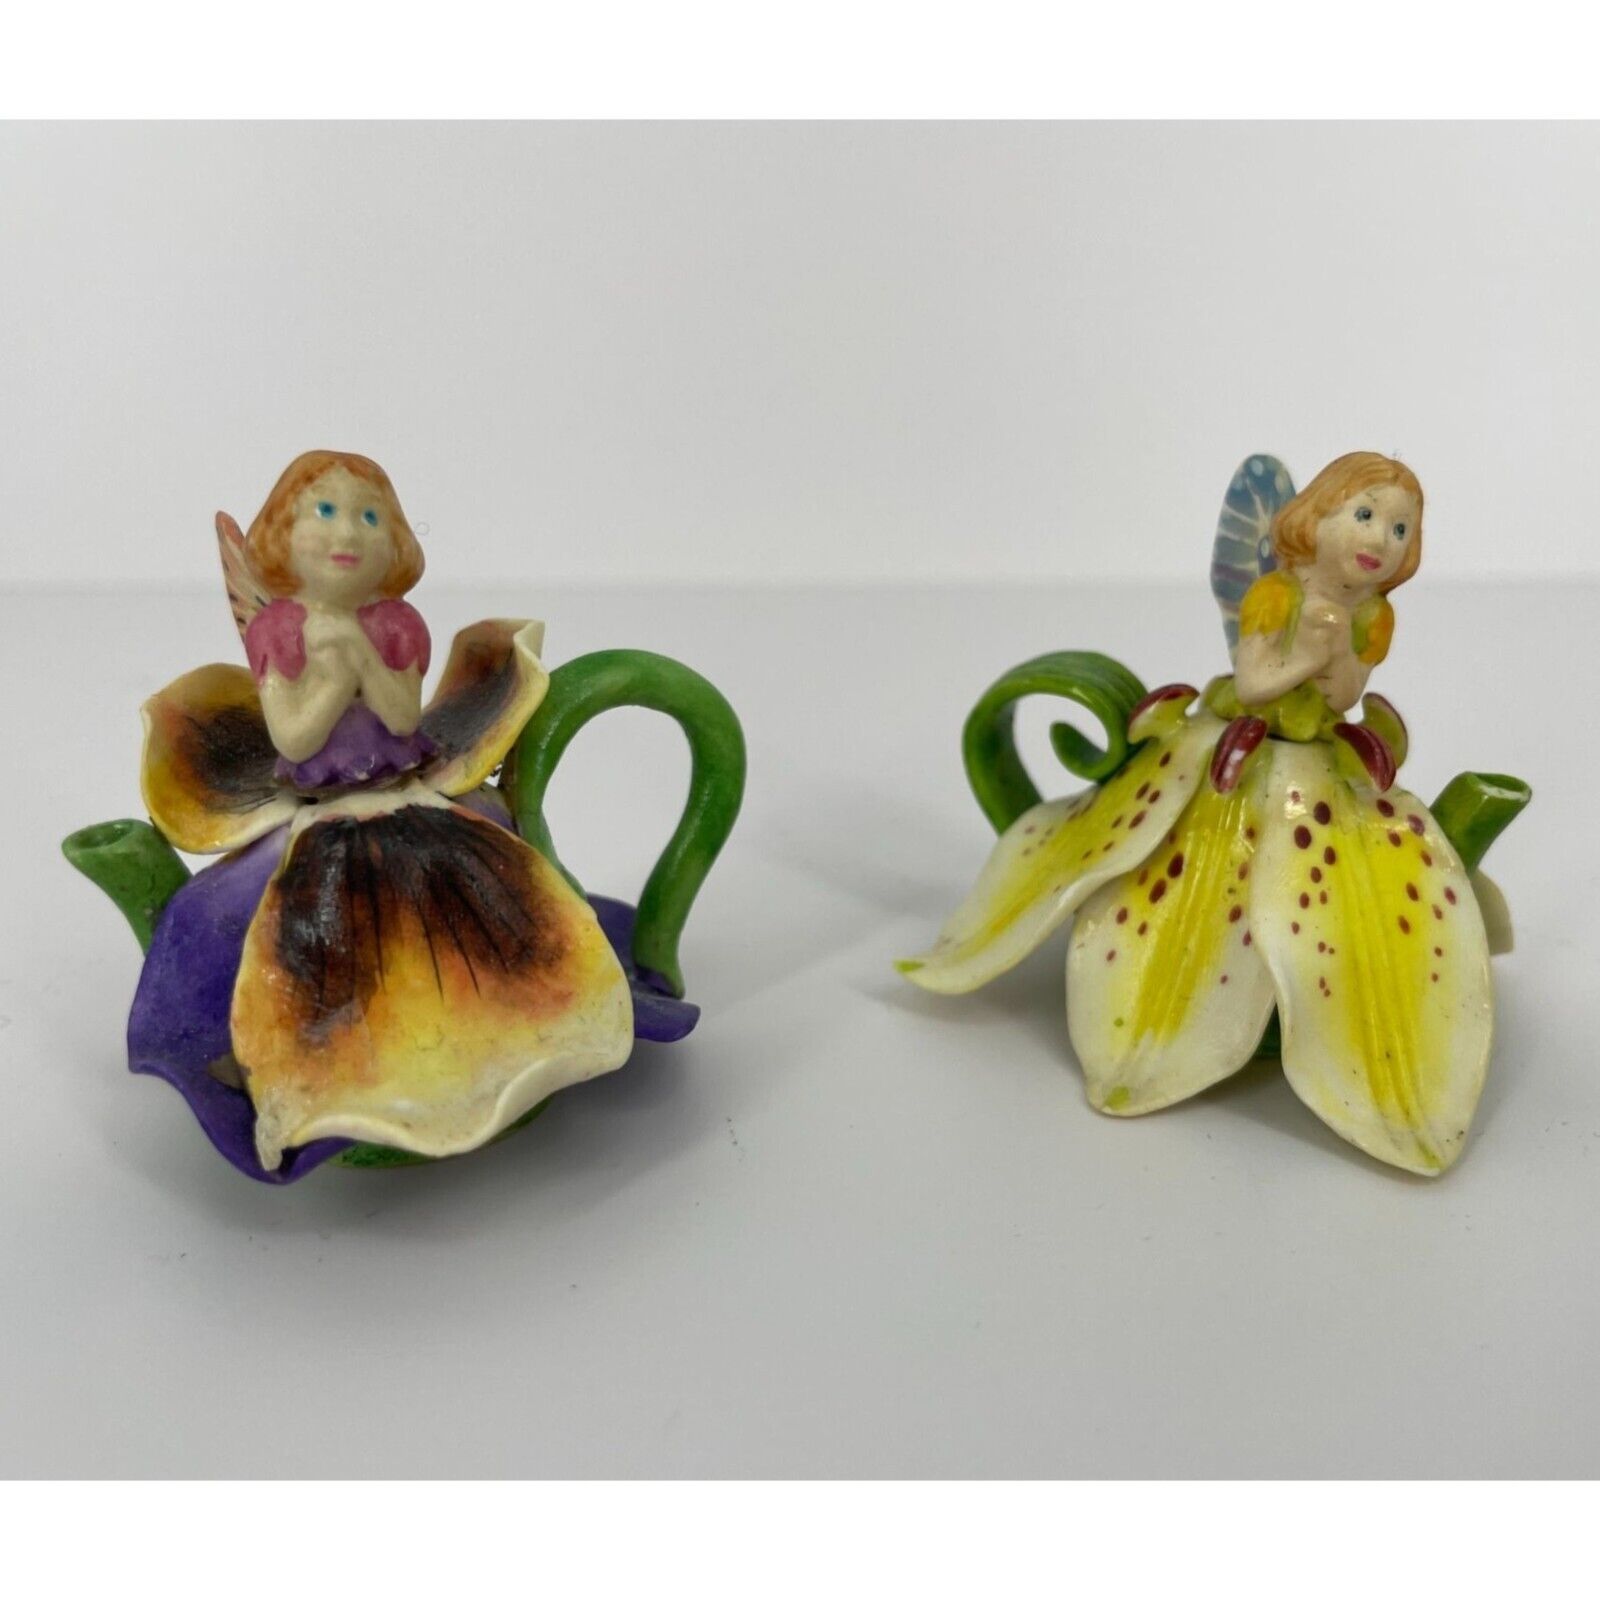 Fairy Flower Miniature Figurines Ceramic Delicate Dainty Beautifully Detailed 2